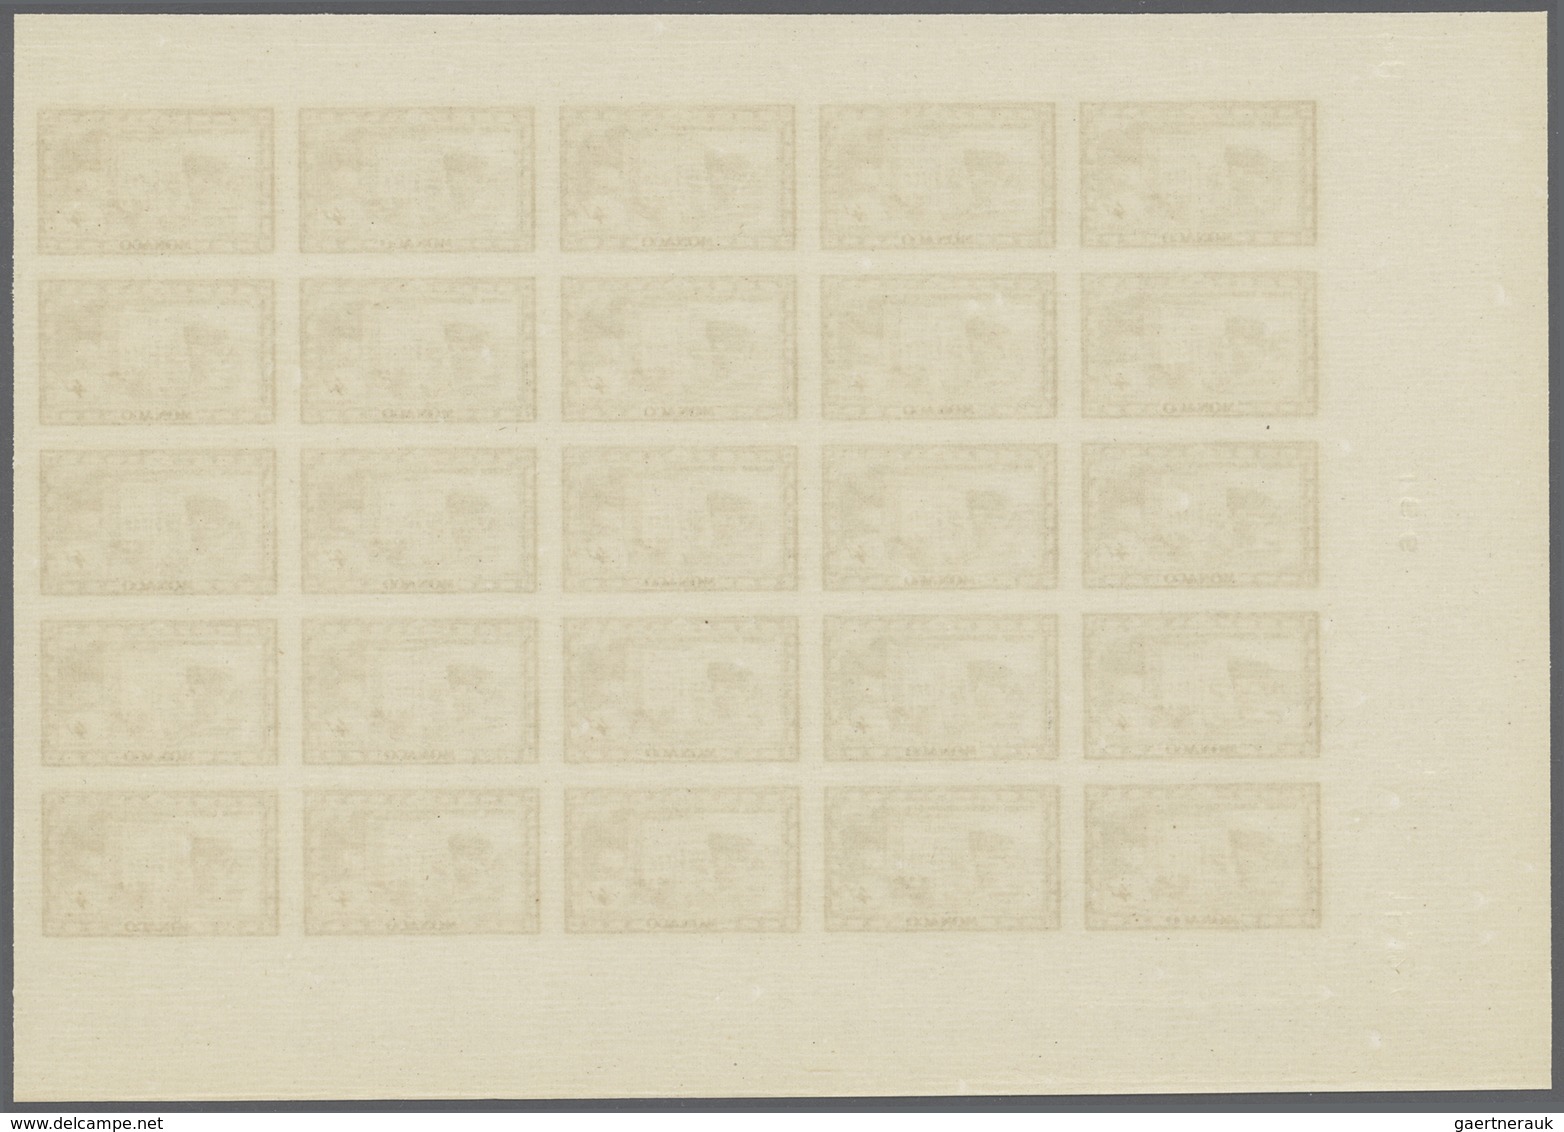 Monaco: 1949, 100th birthday of Prince Albert I. complete set of eight in IMPERFORATE blocks of 25 f